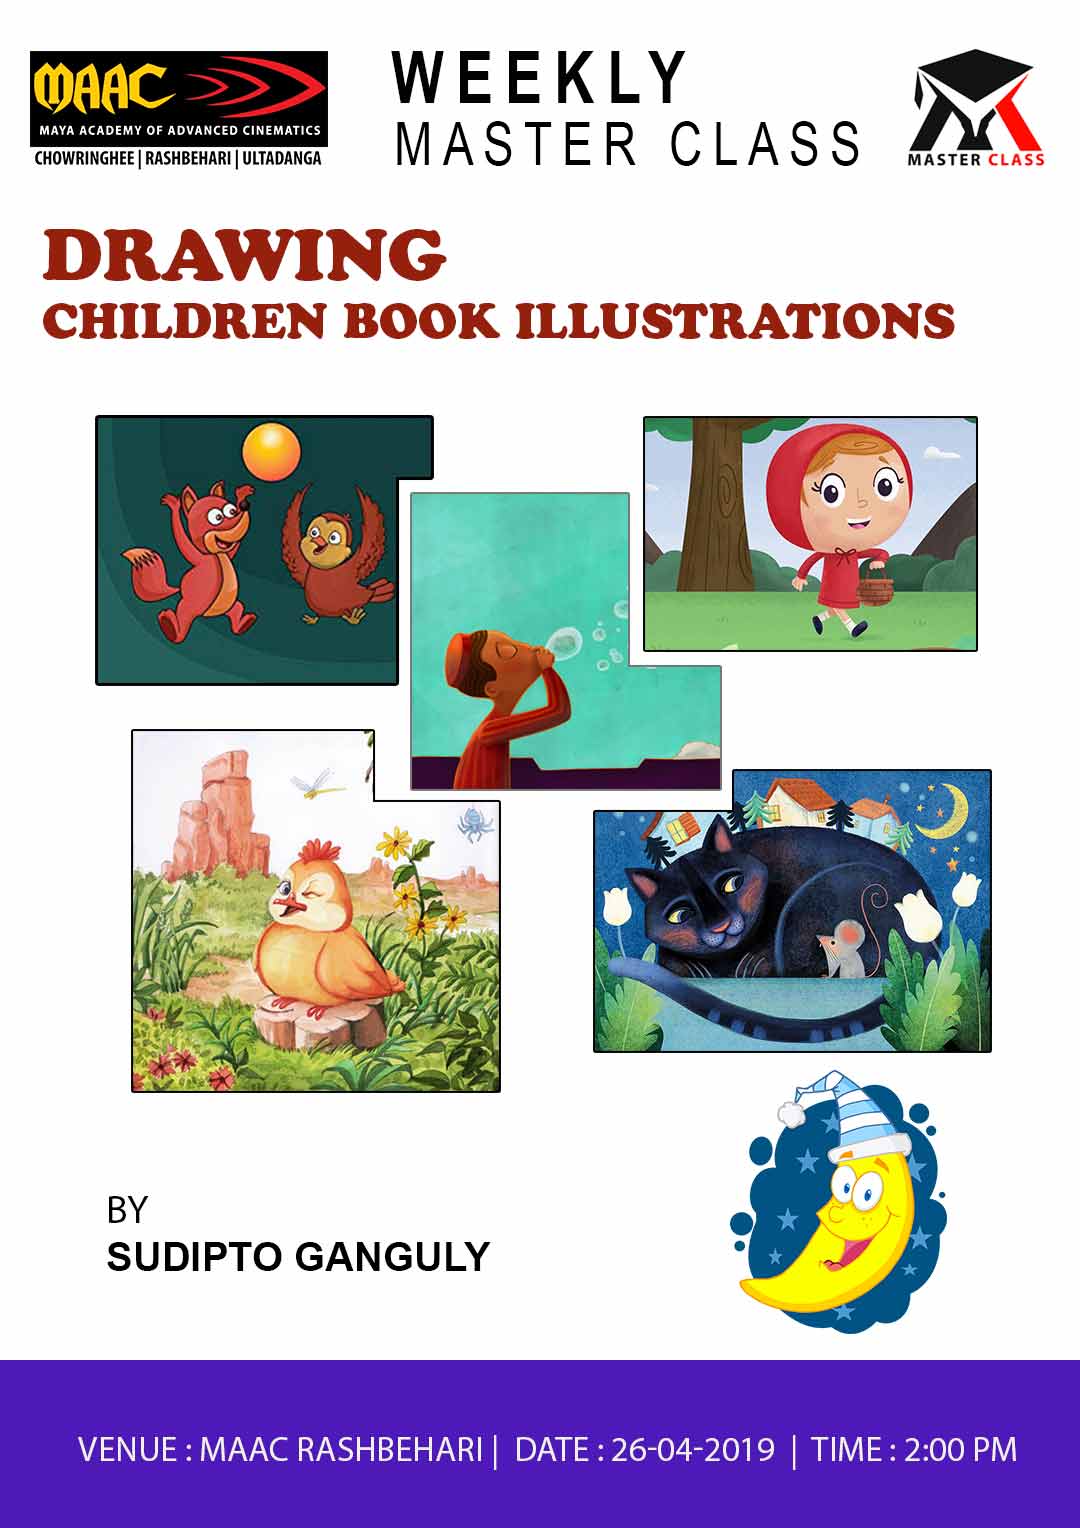 Weekly Master Class on Drawing Children Book Illustrations